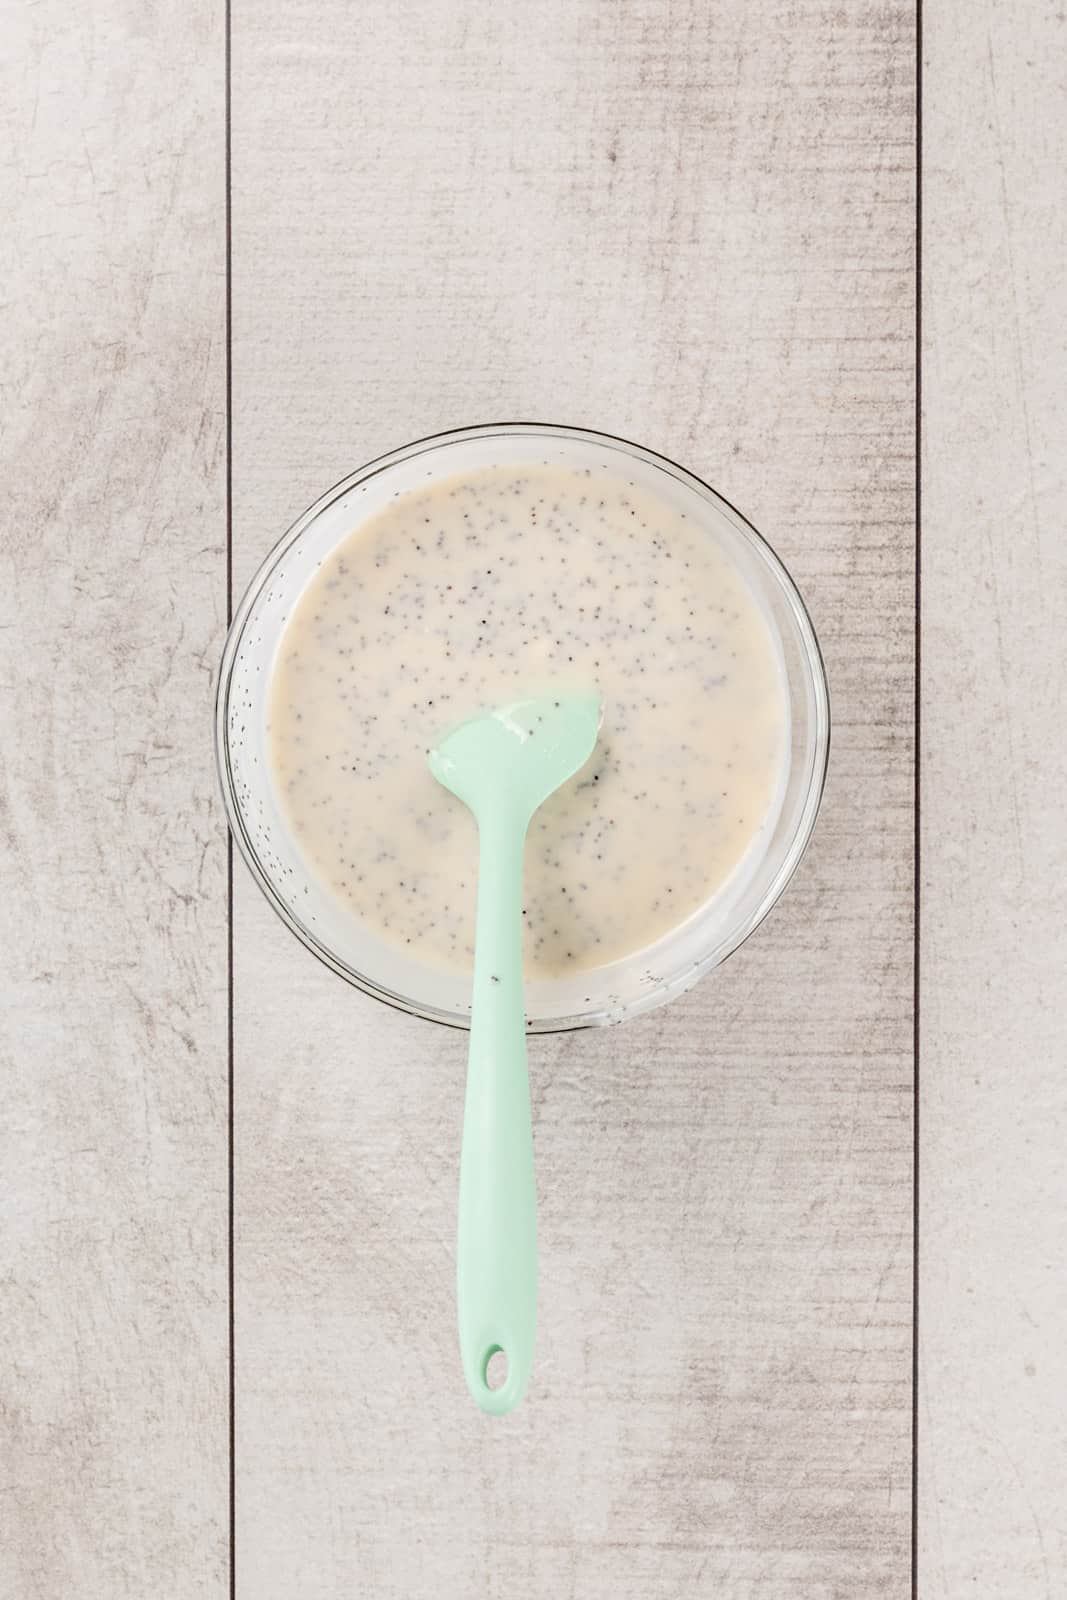 A glass bowl on a white wood tabletop is filled with dairy free poppyseed dressing. A light green spatula is in the dressing.